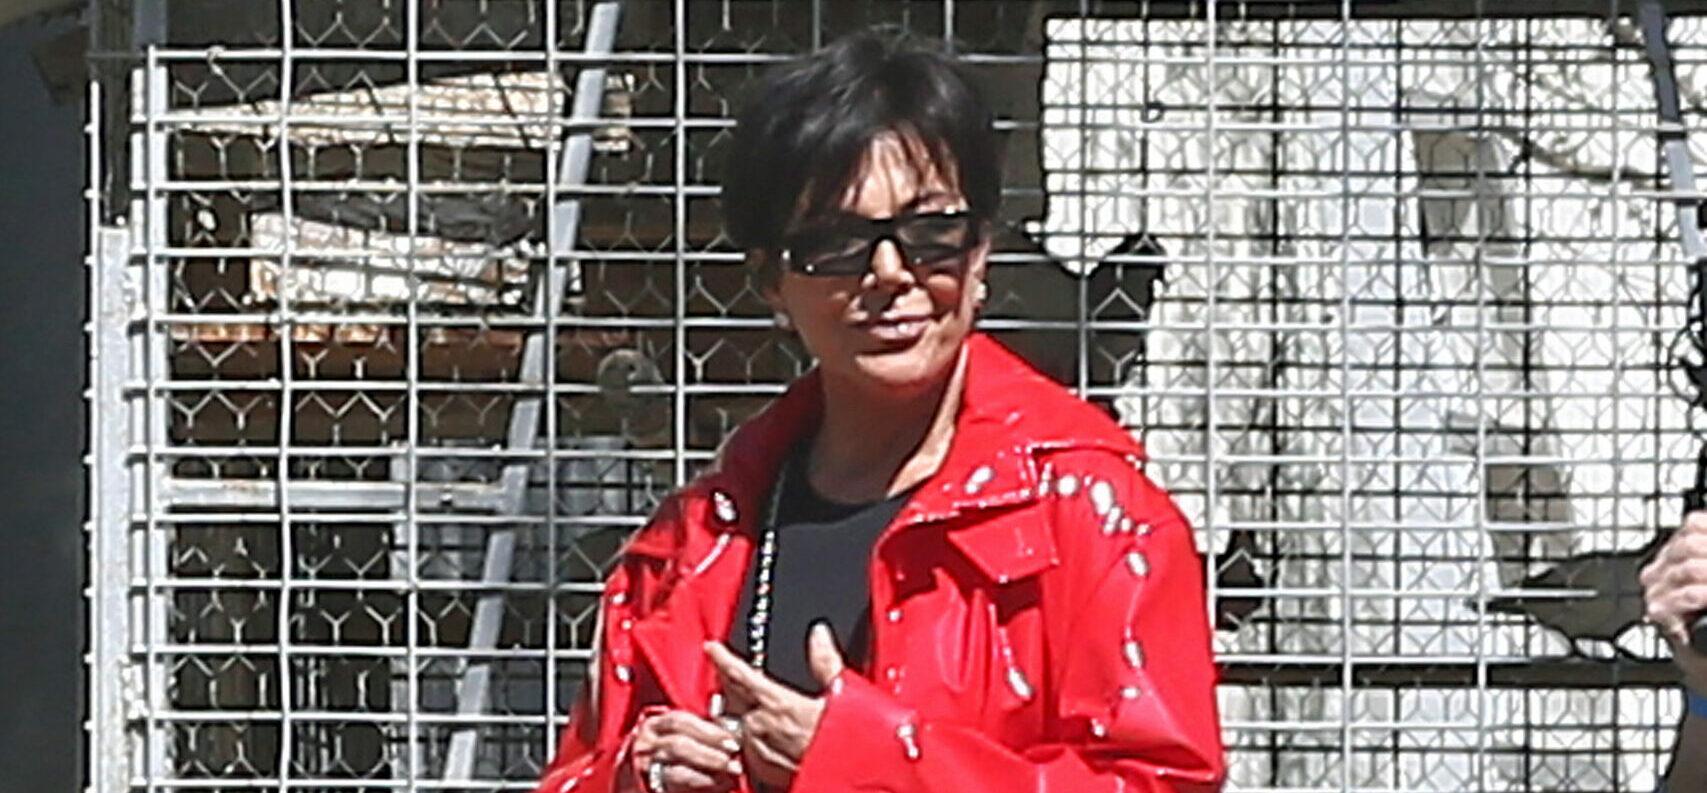 Khloe Kardashian and Kris Jenner visit a farm while filming in Fillmore